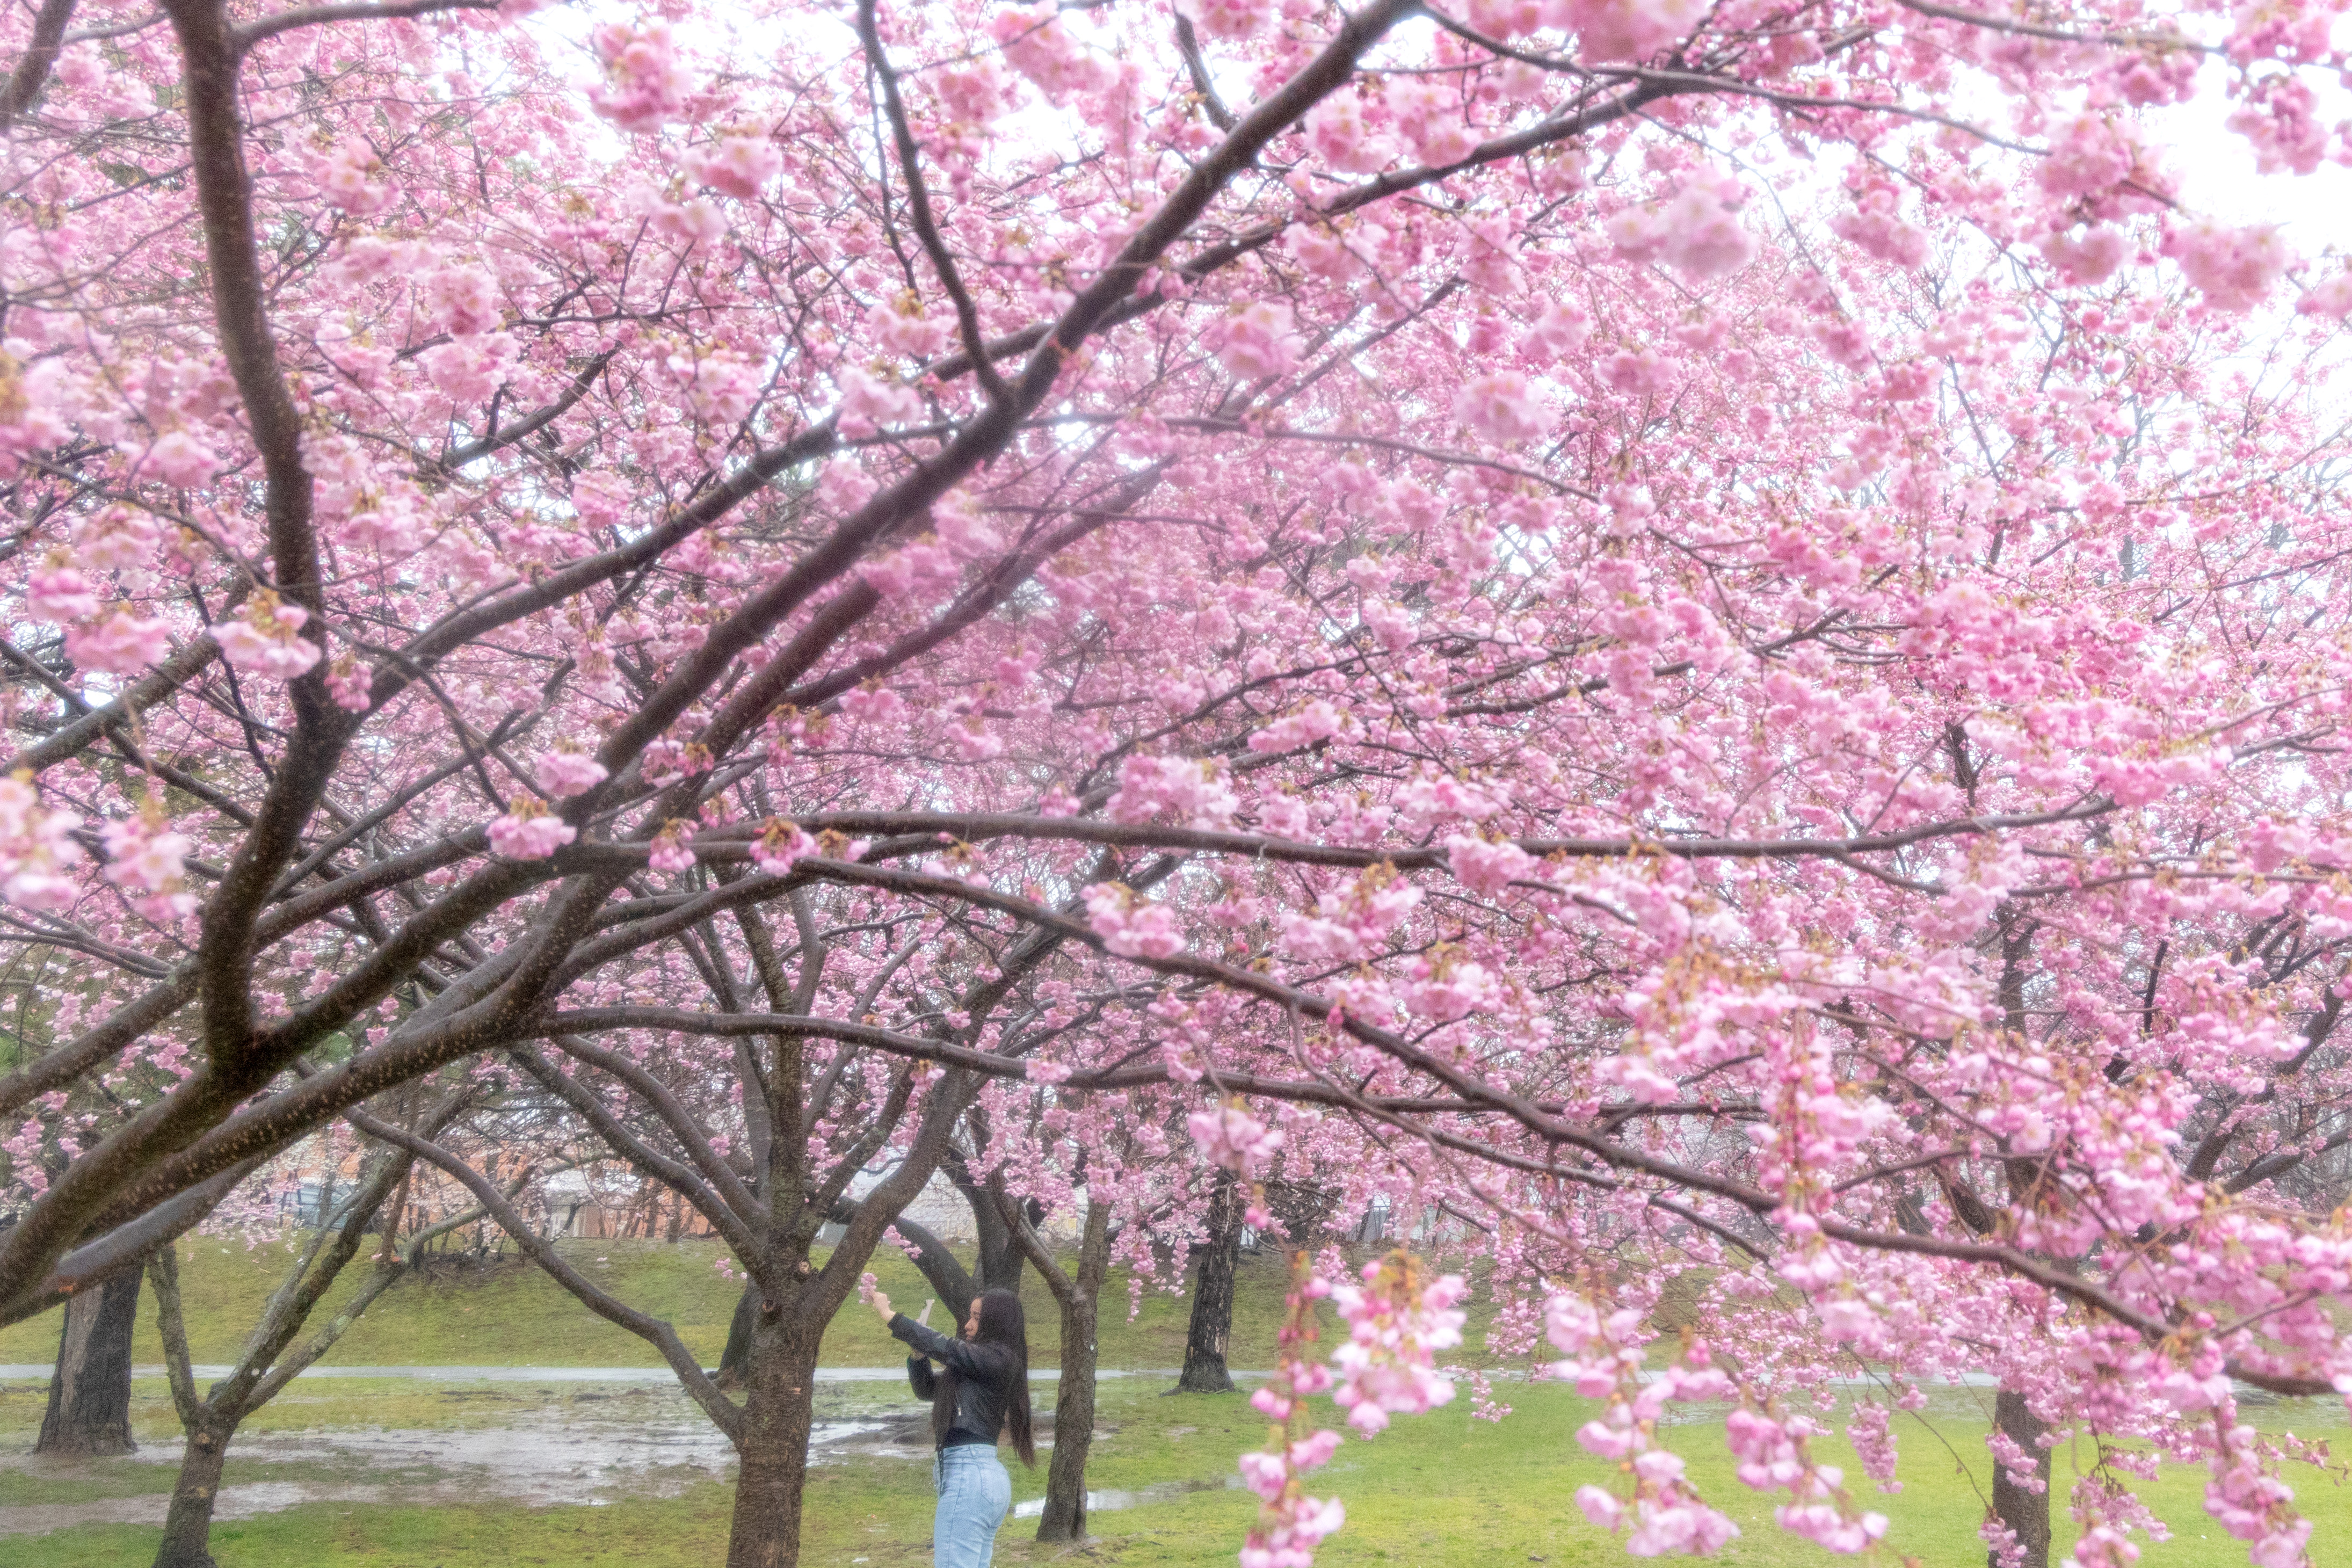 A photo of Newark's Branch Brook Park cherry blossoms.